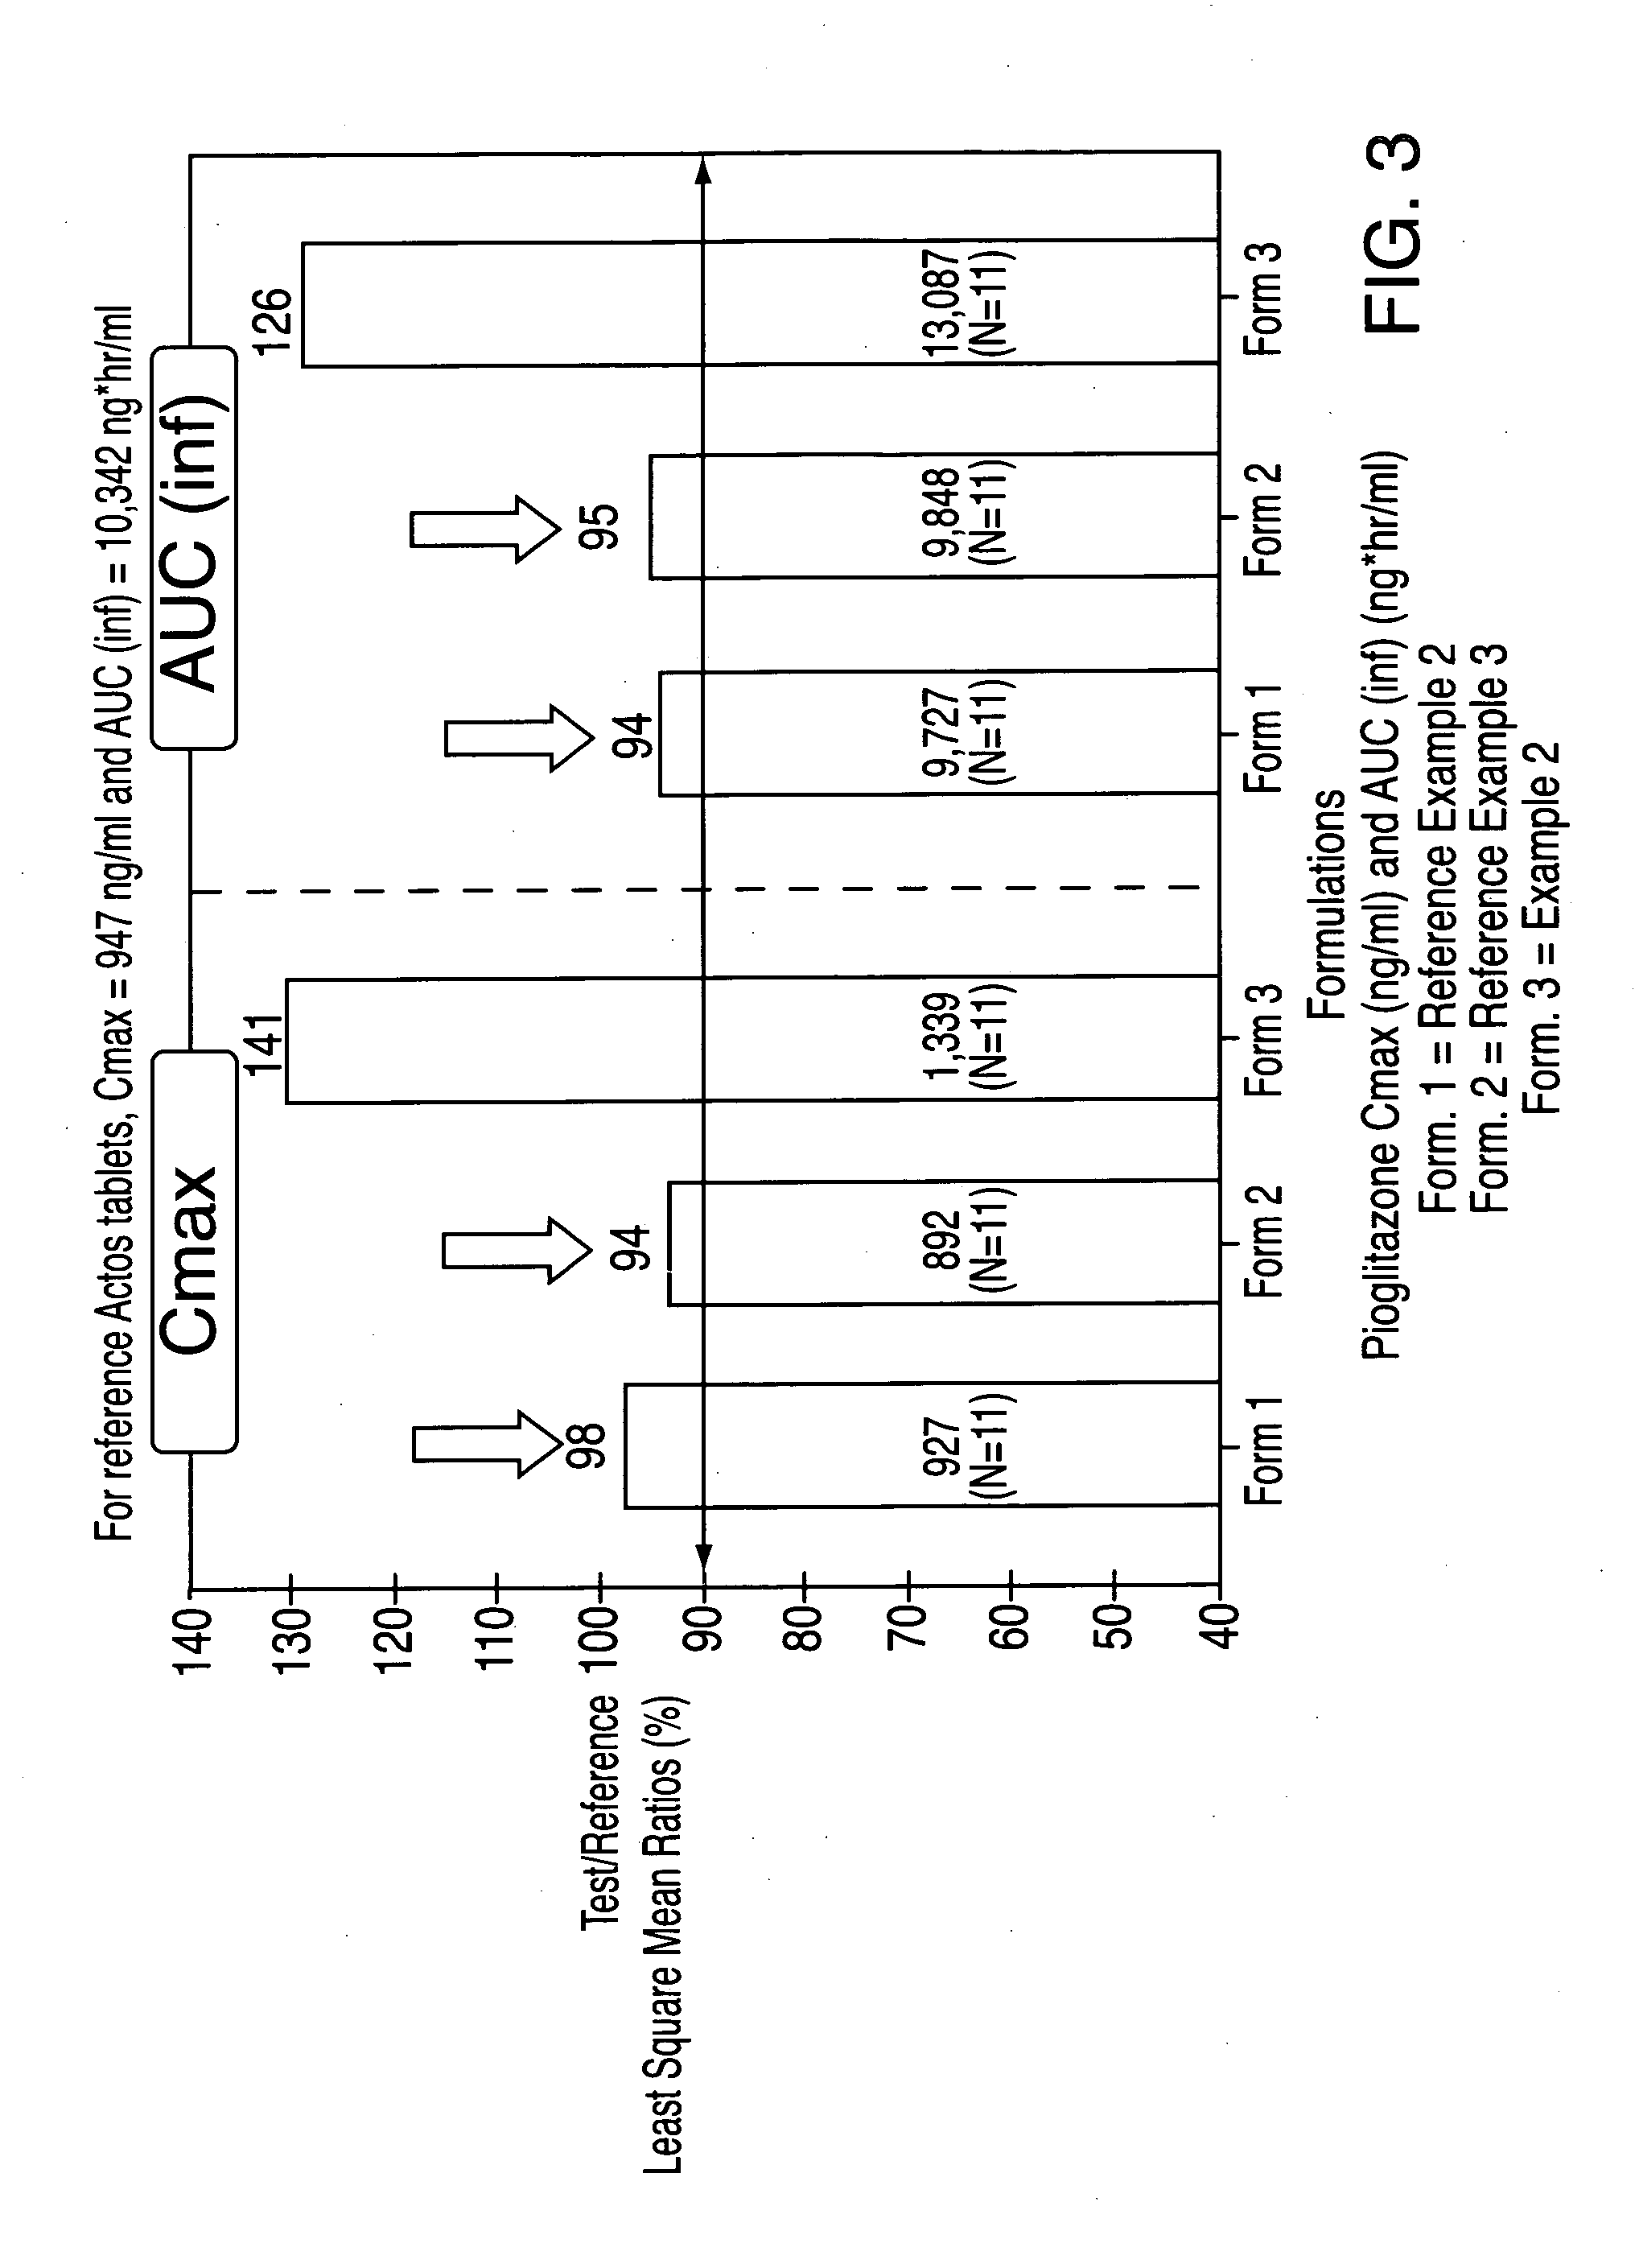 Novel pharmaceutical formulation containing a biguanide and a thiazolidinedione derivative